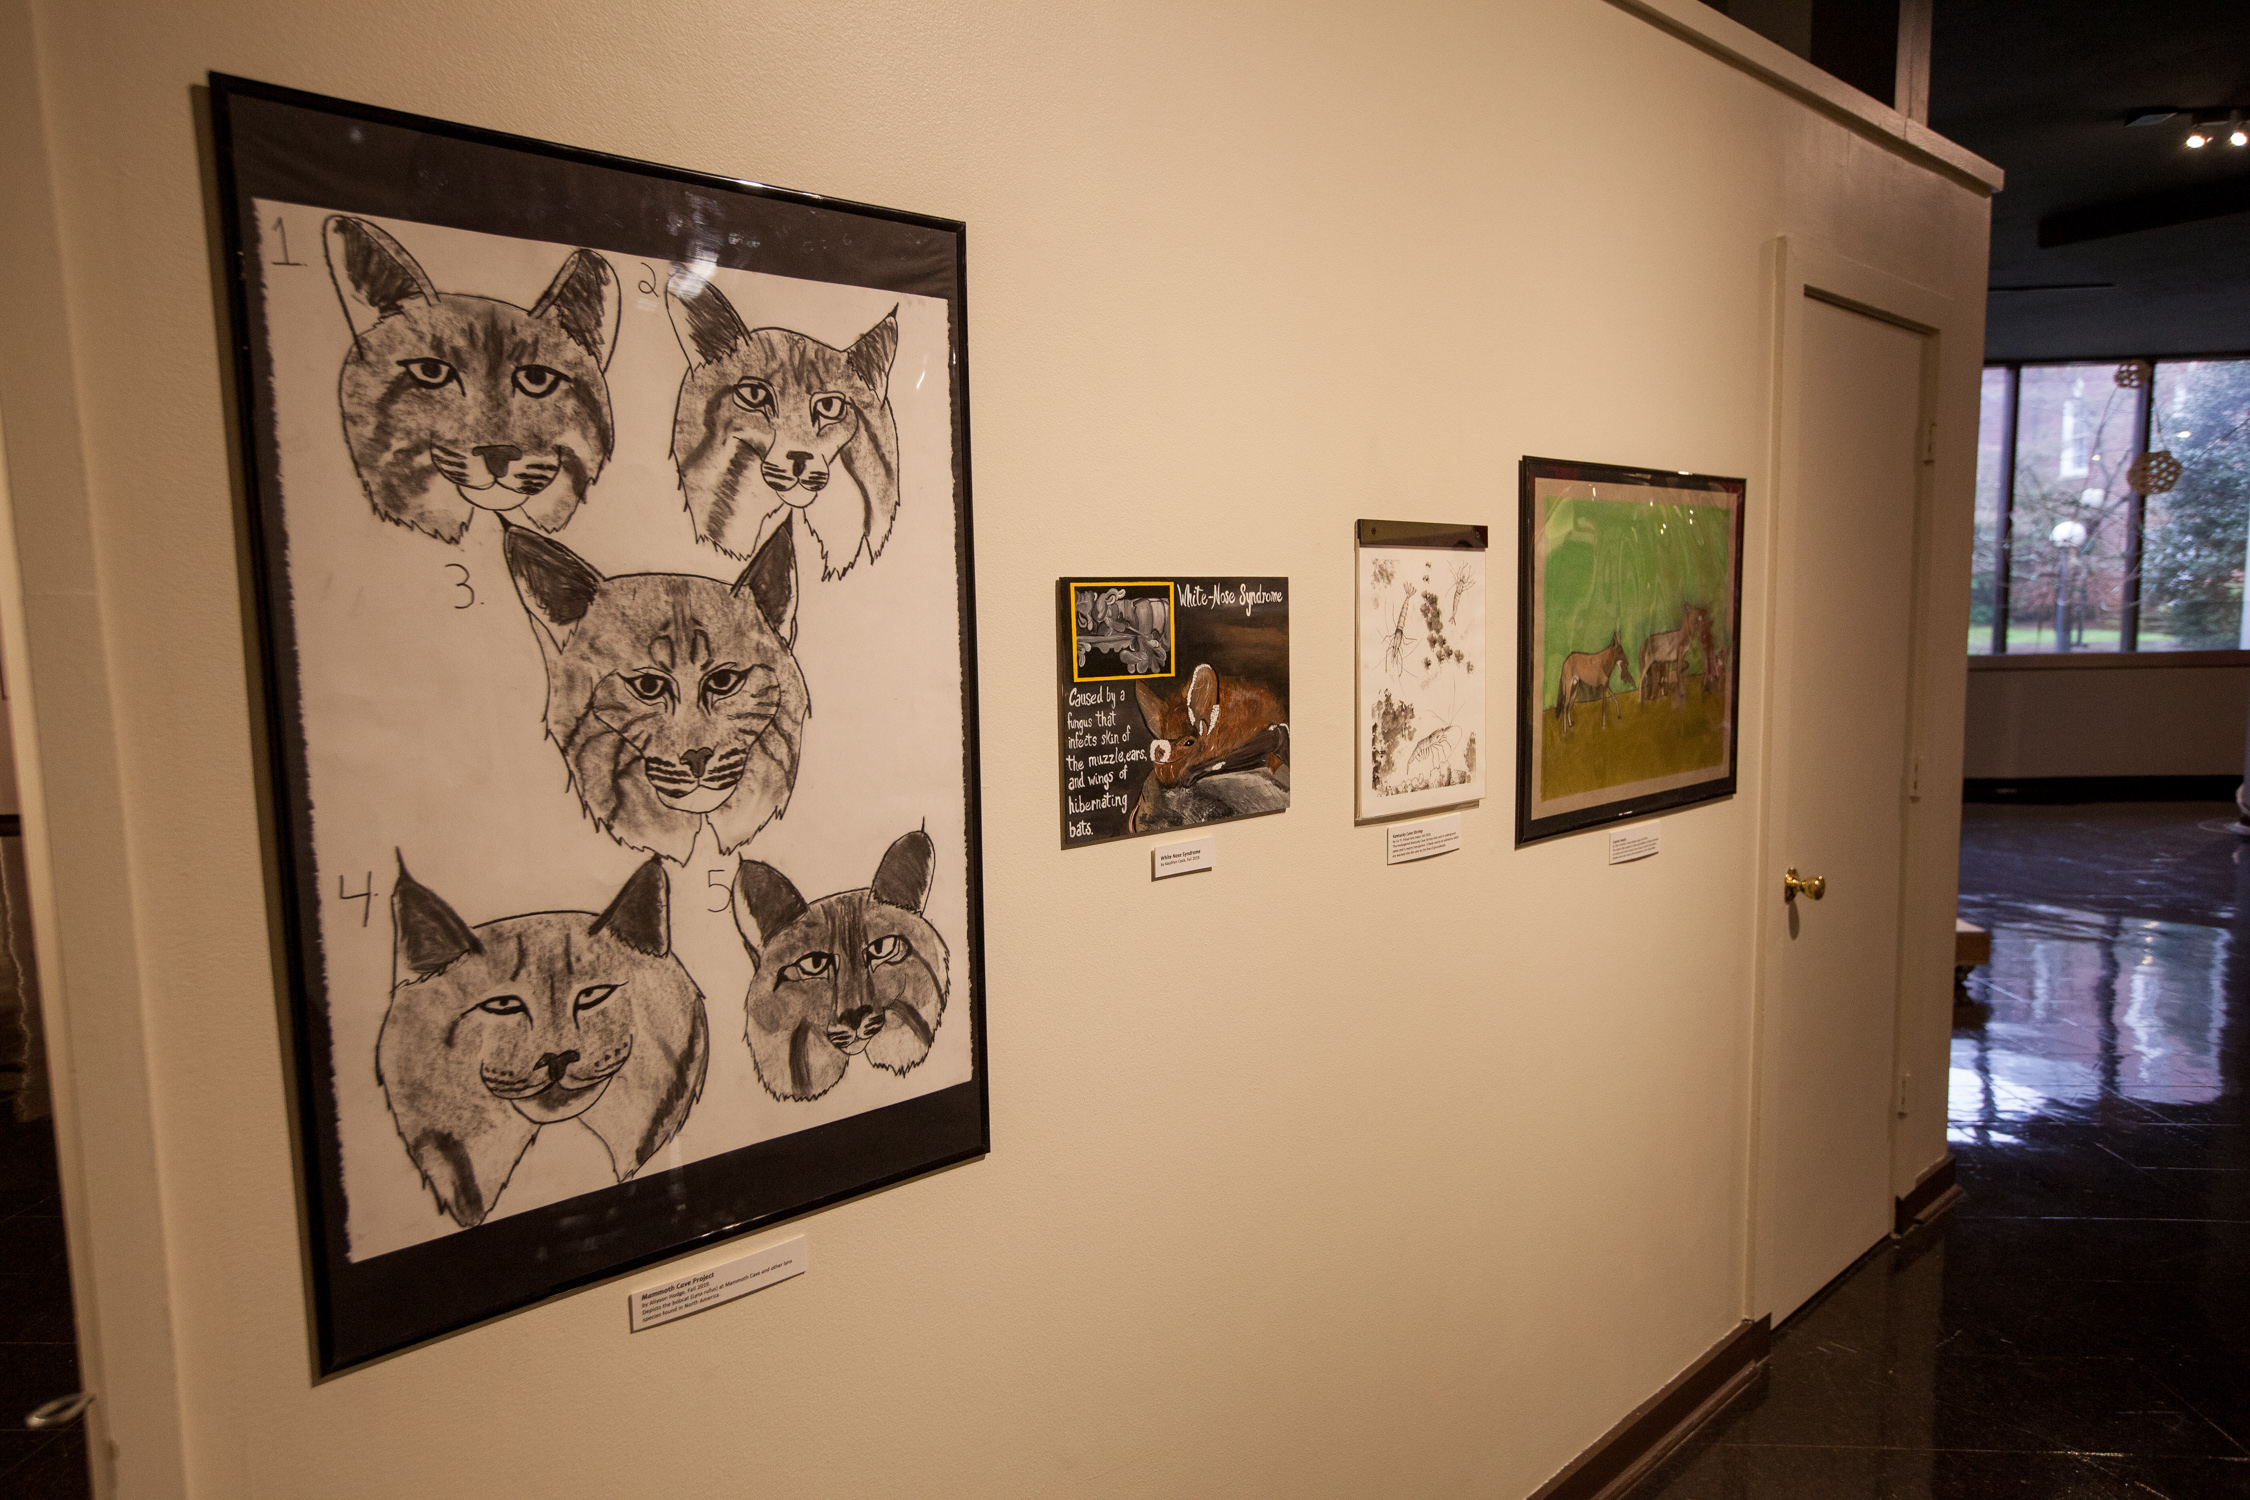 Student artworks in the Gazing Deeply exhibit